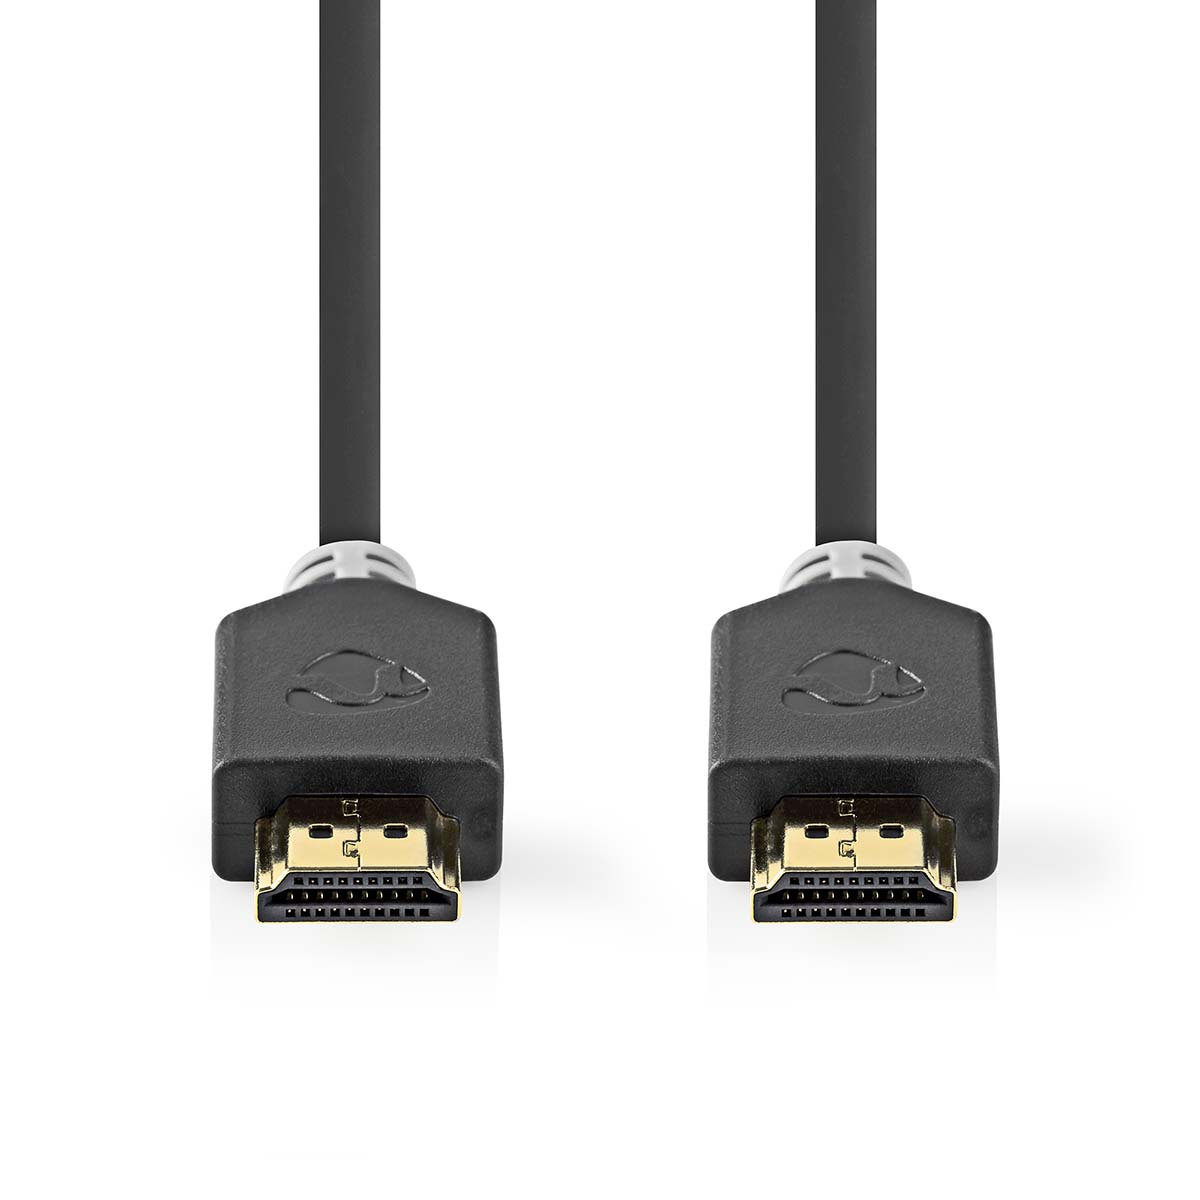 8K And 10K Video Supported Under Latest HDMI Spec – channelnews